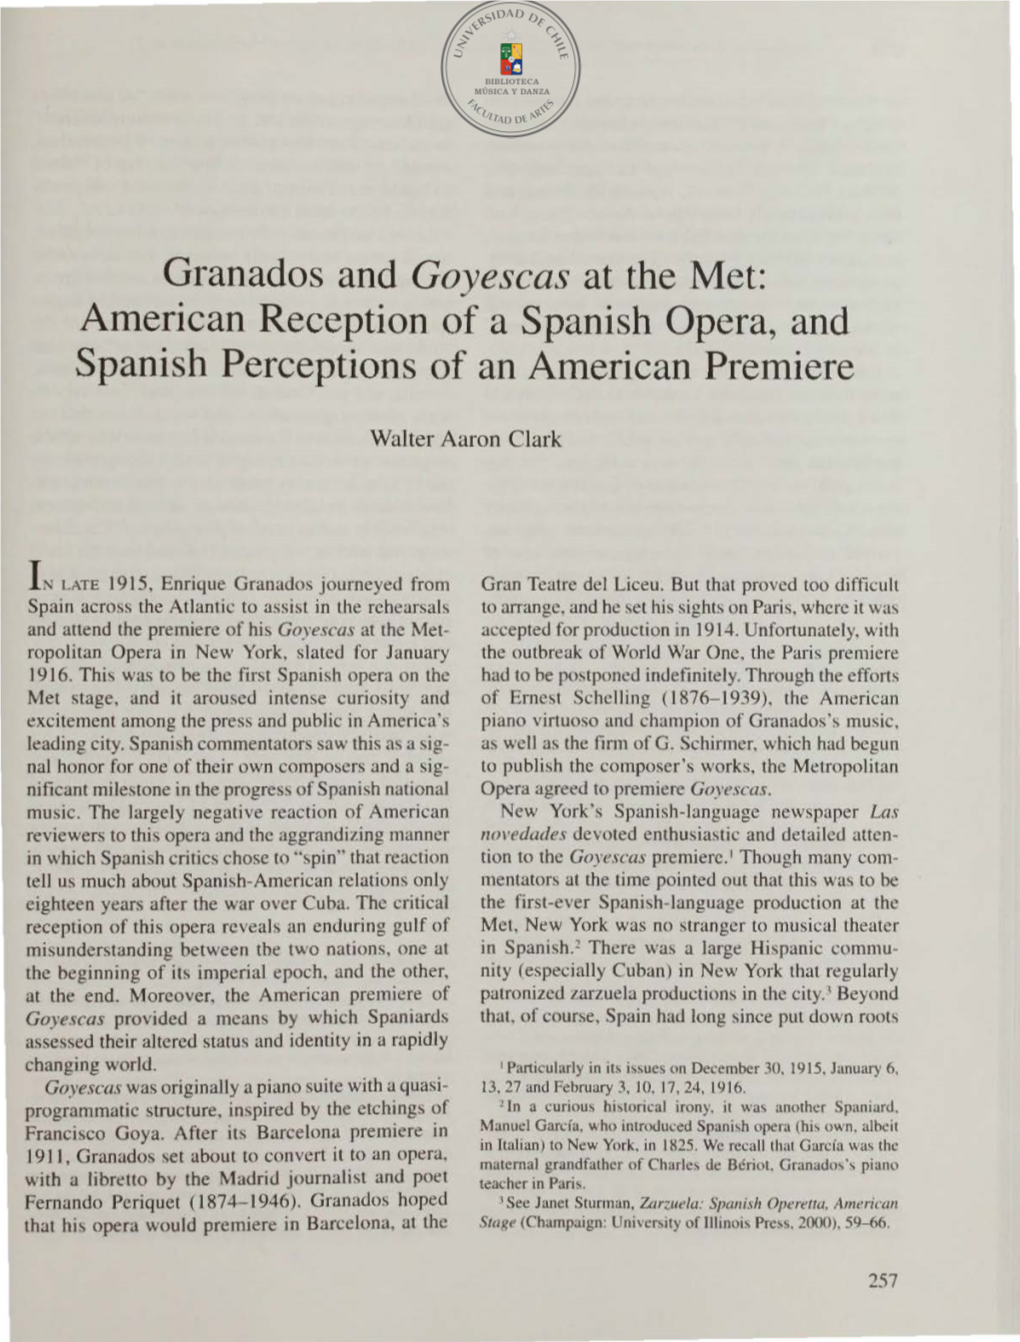 Granados and Goyescas at the Met: American Reception of a Spanish Opera, and Spanish Perceptions of an American Premiere